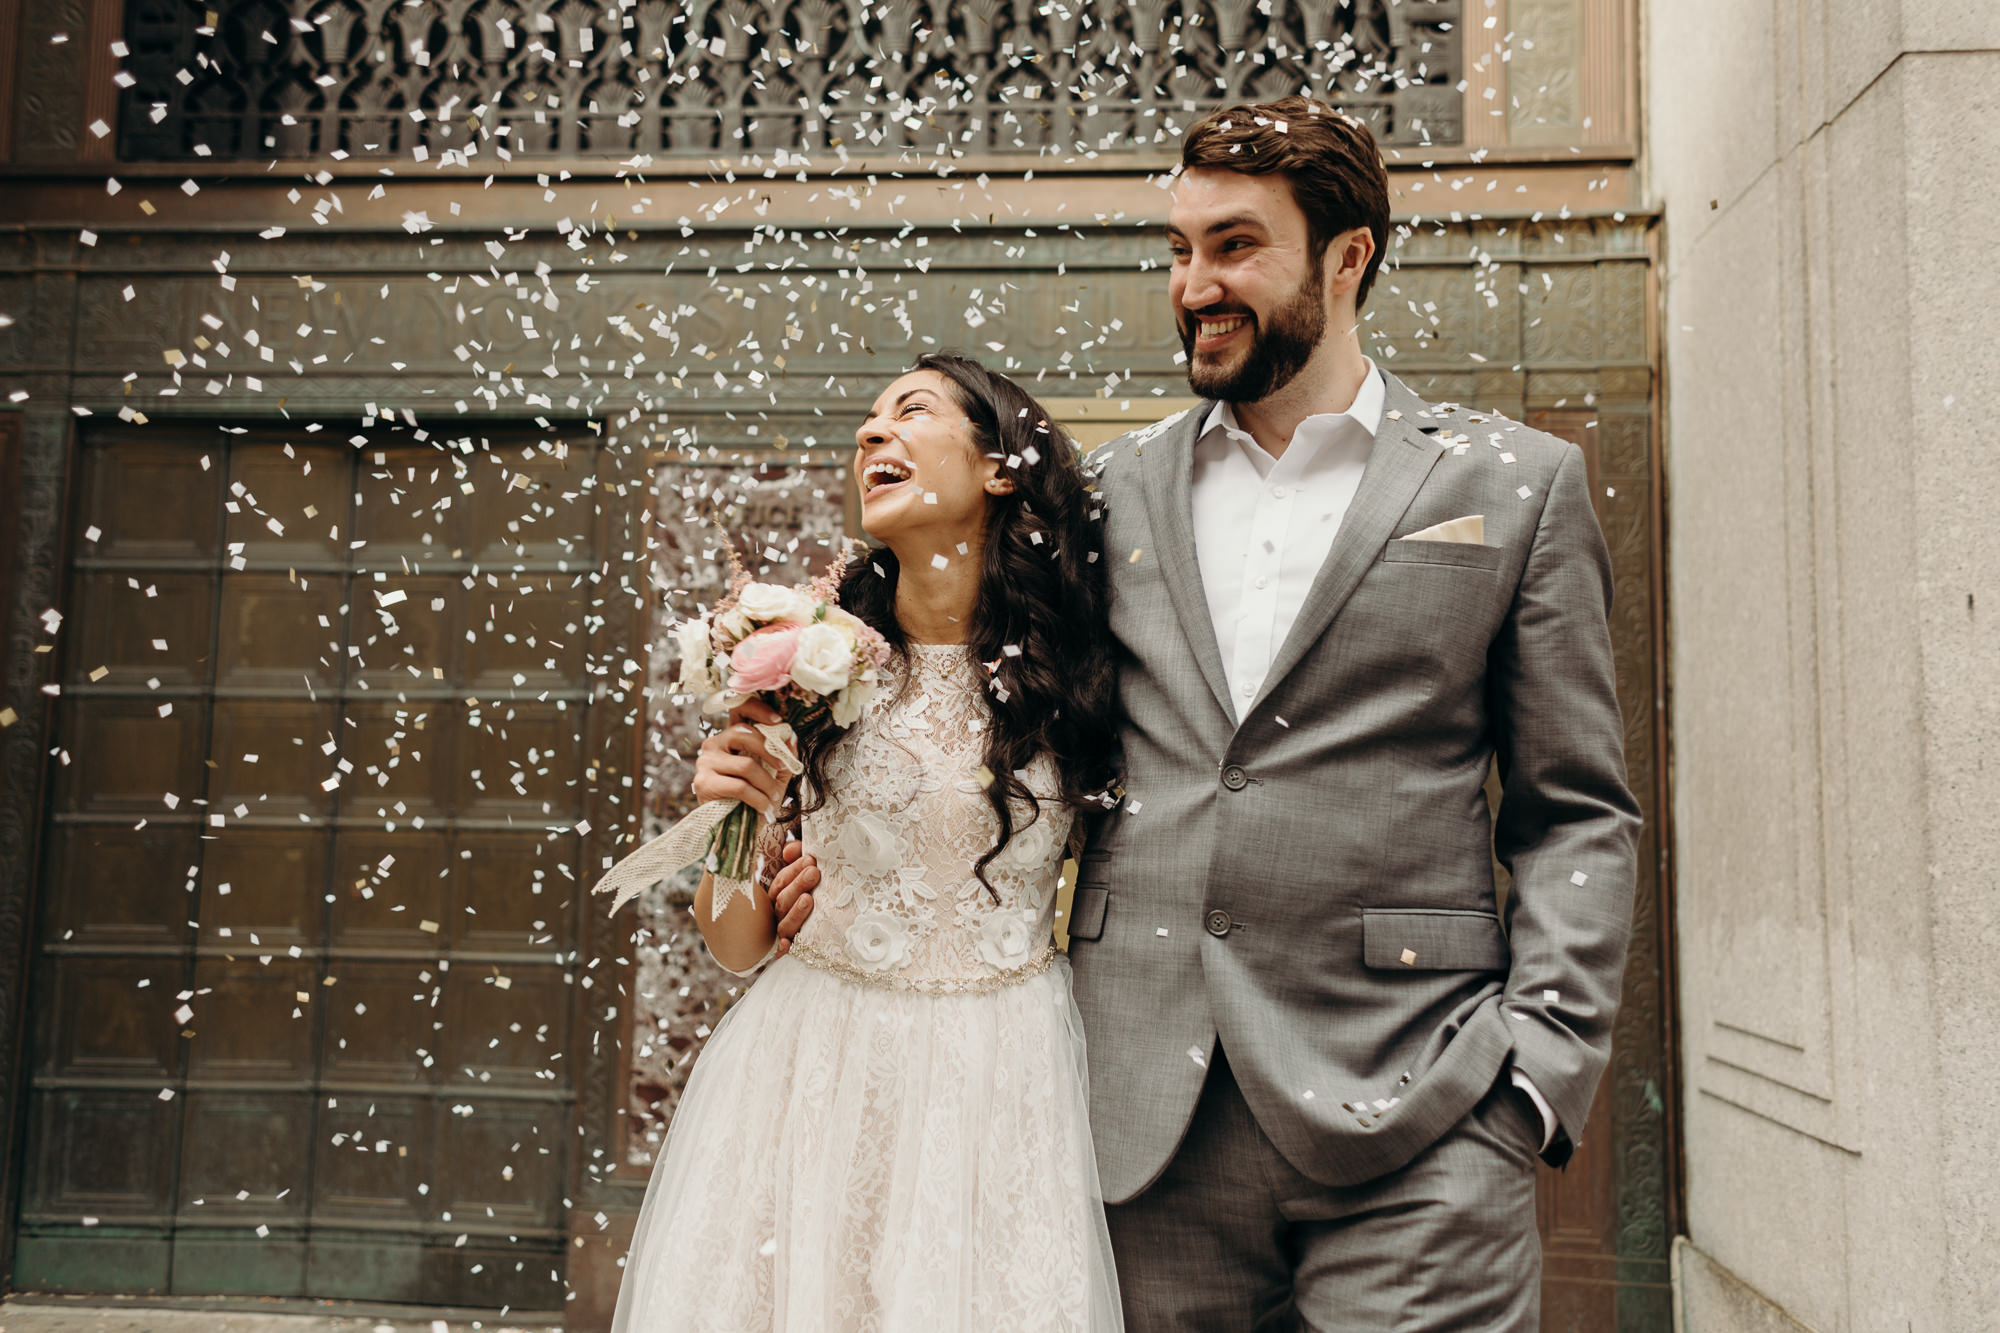 a bride and groom celebrate with confetti after their wedding ceremony at city hall in new york city, ny